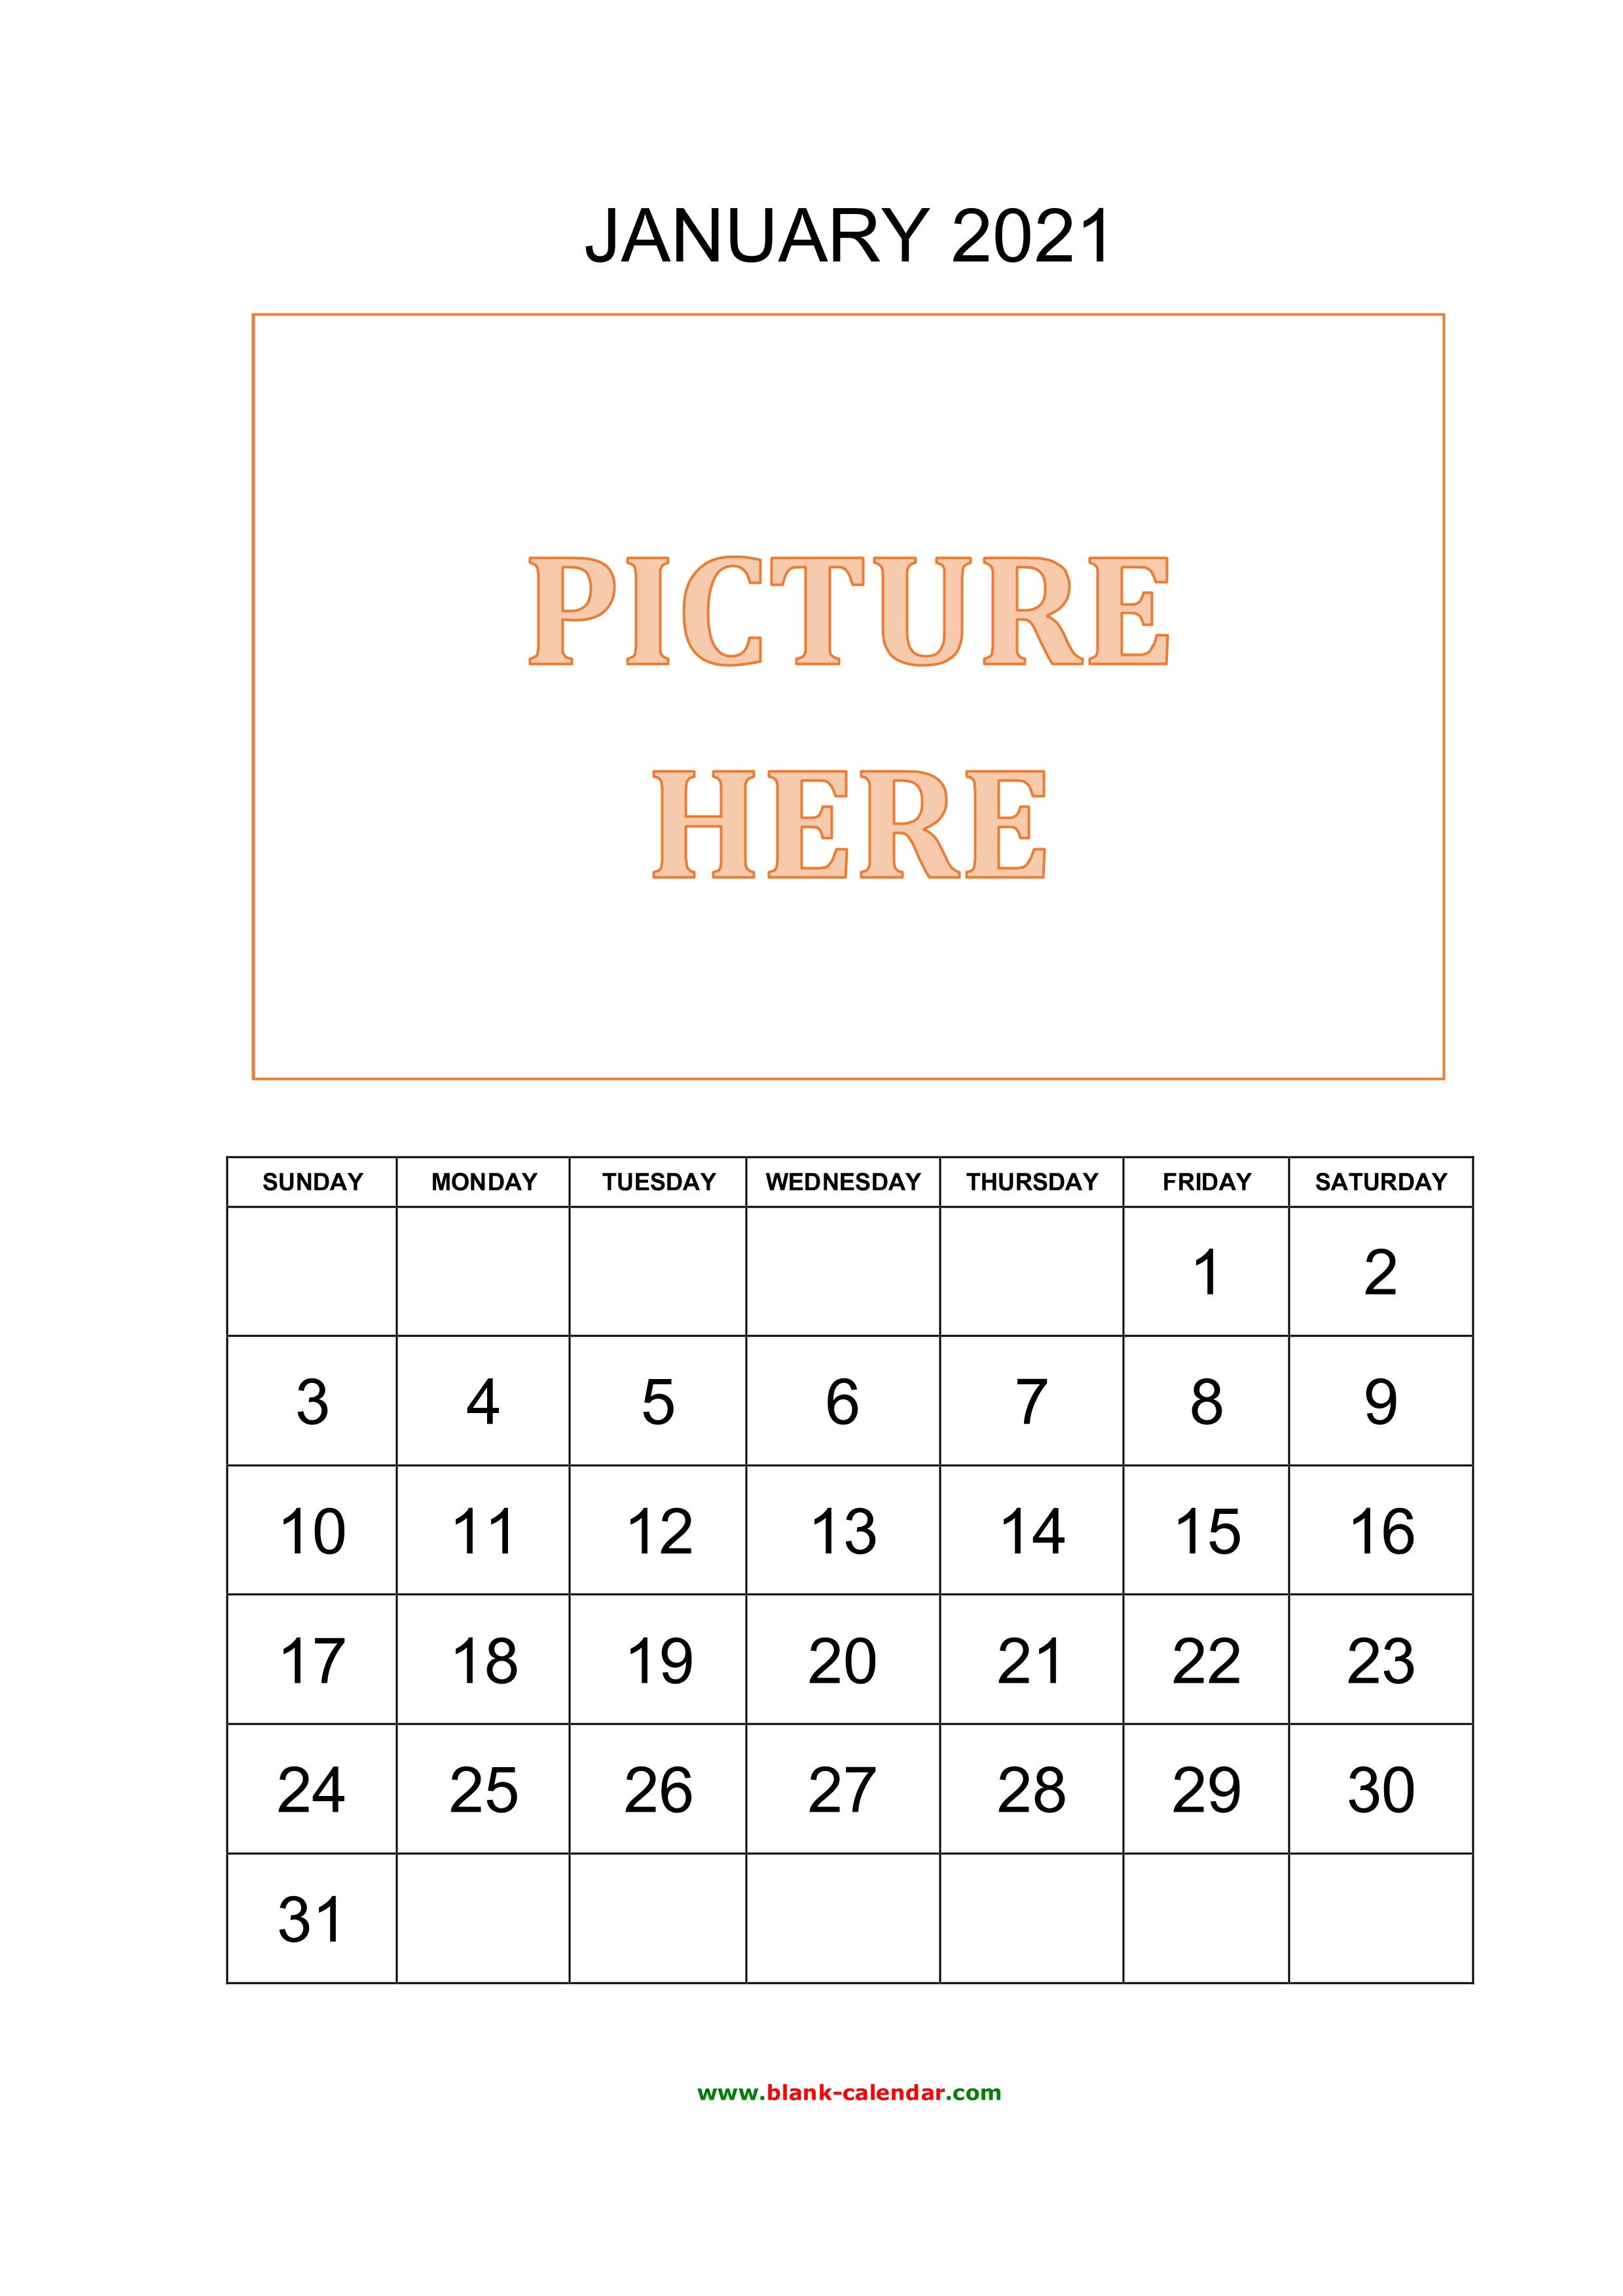 Free Download Printable January 2021 Calendar Pictures Can Be Placed At The Top